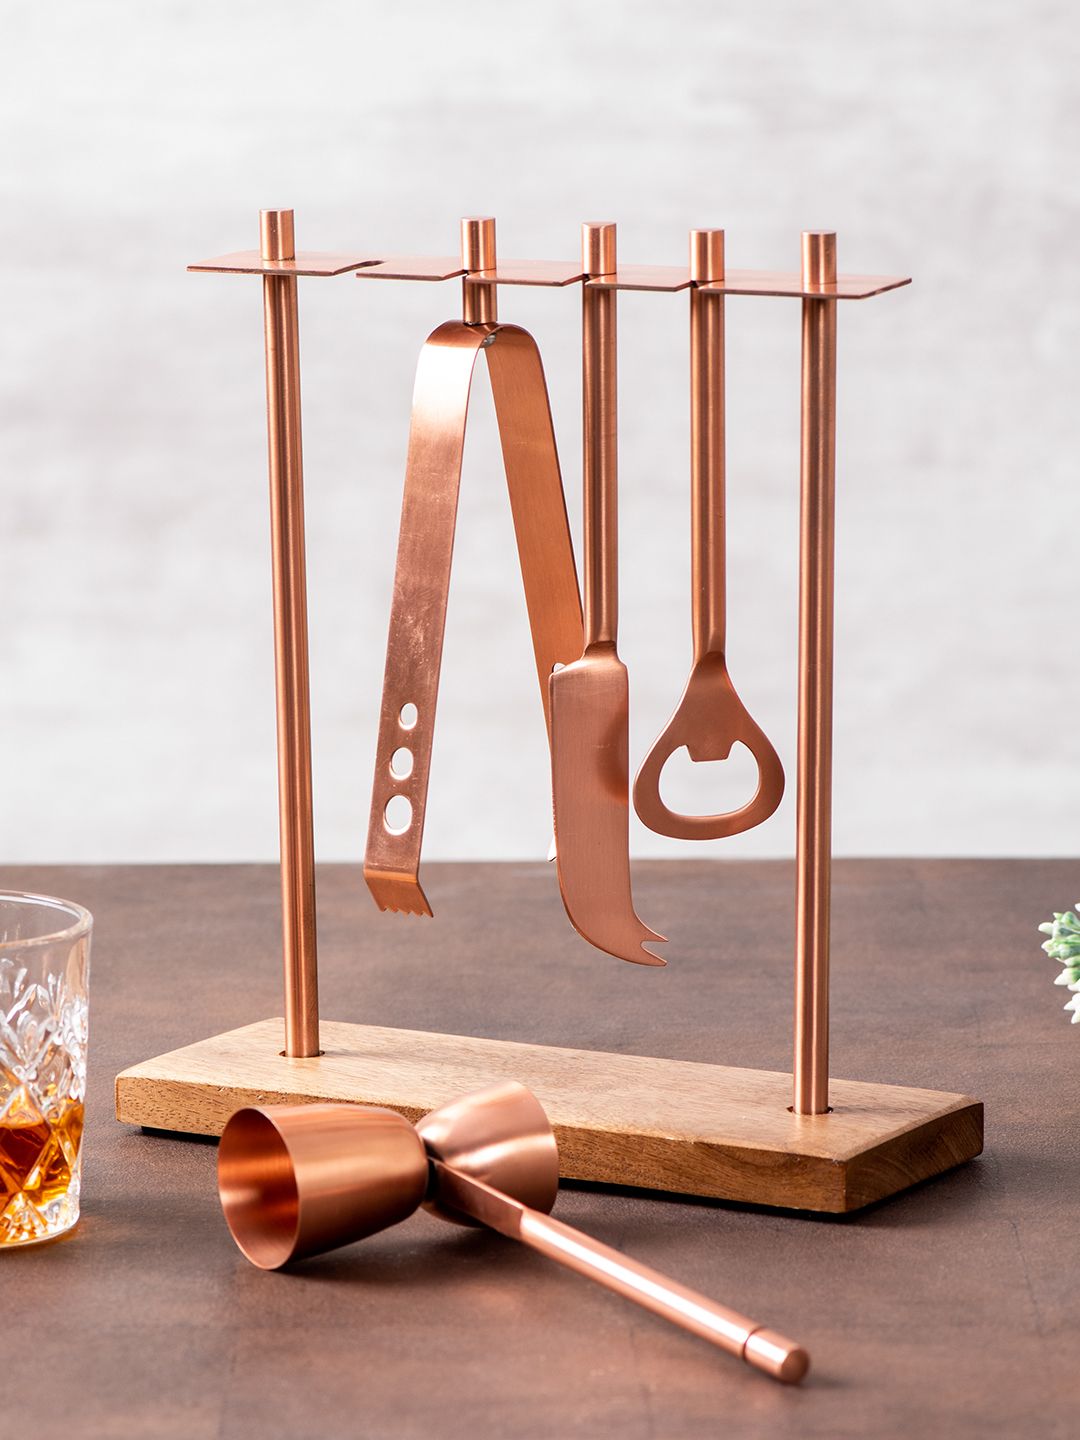 nestroots Set of 4 Copper-Toned Bar Tools Price in India